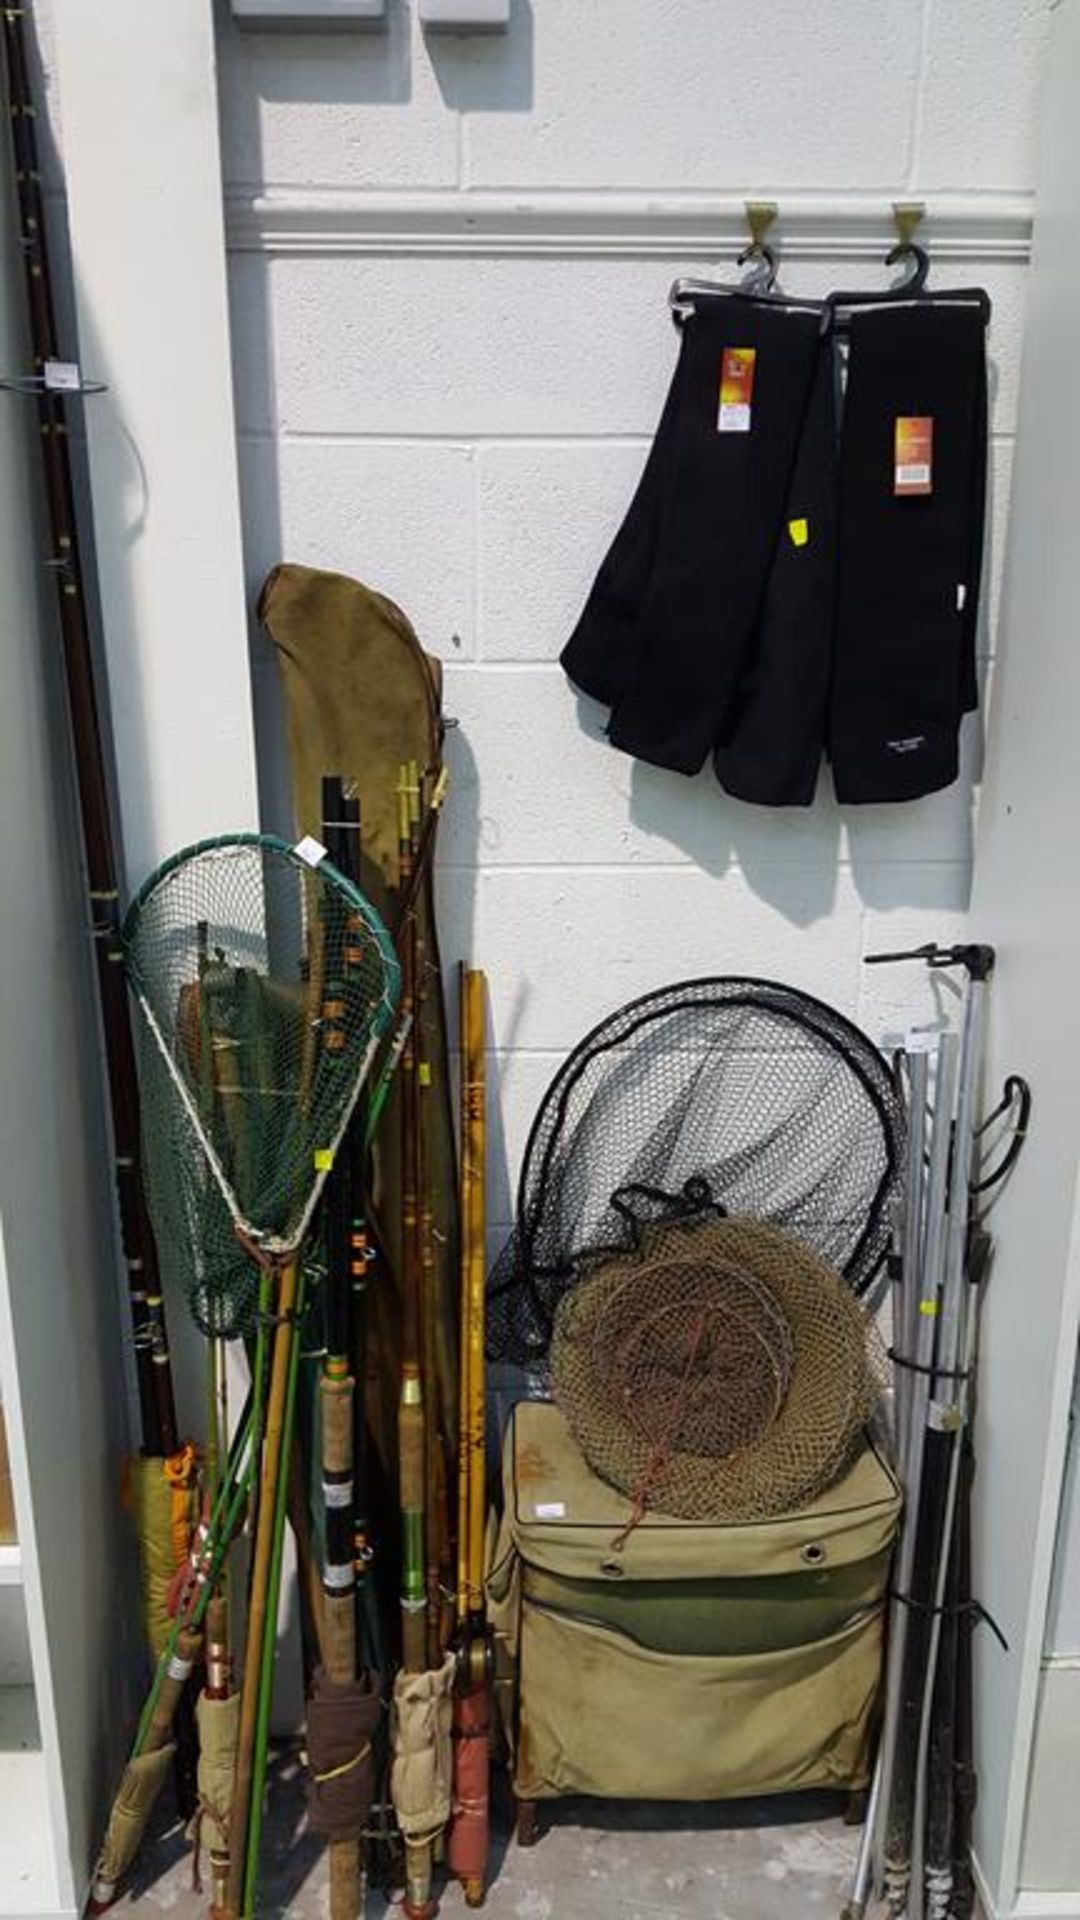 A Selection of Angling Equipment